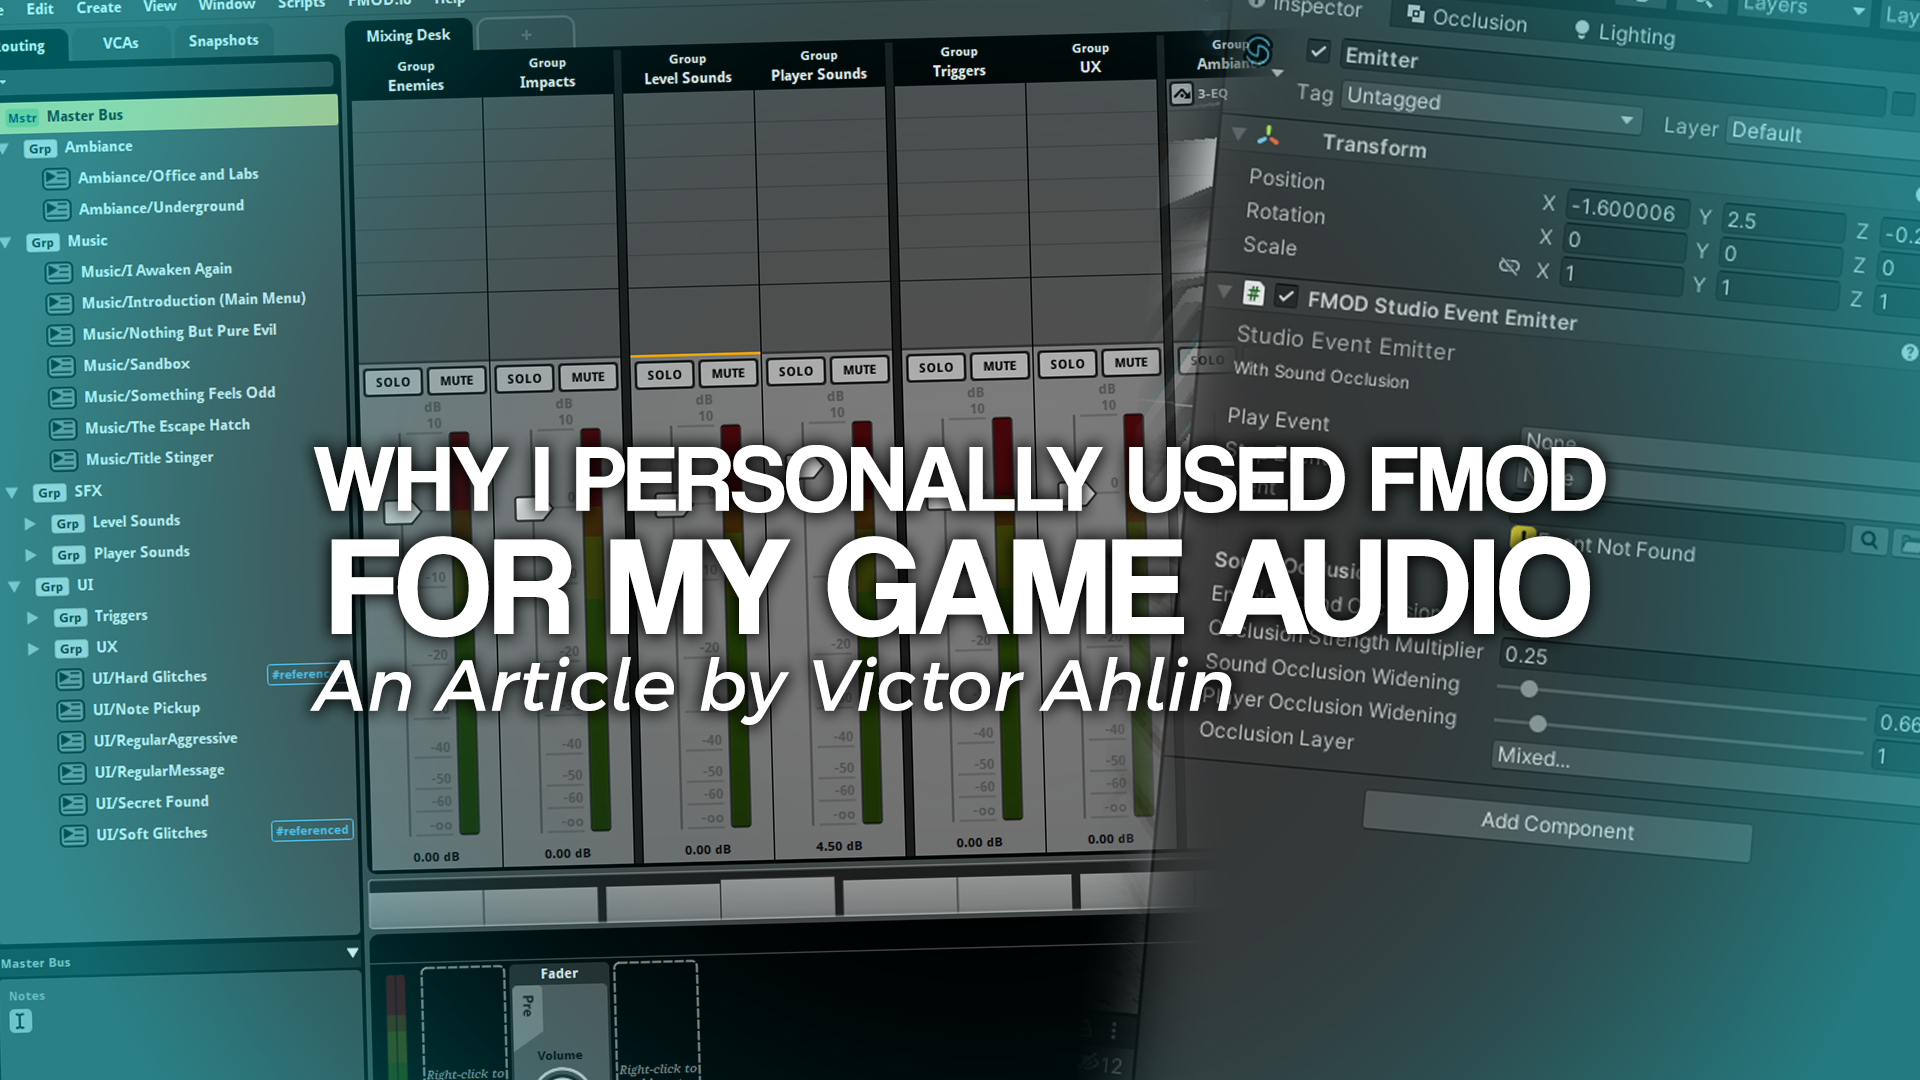 Why I Personally Used FMOD for My Game Audio: DAWs, Indie-Friendly, and Google Resonance Audio